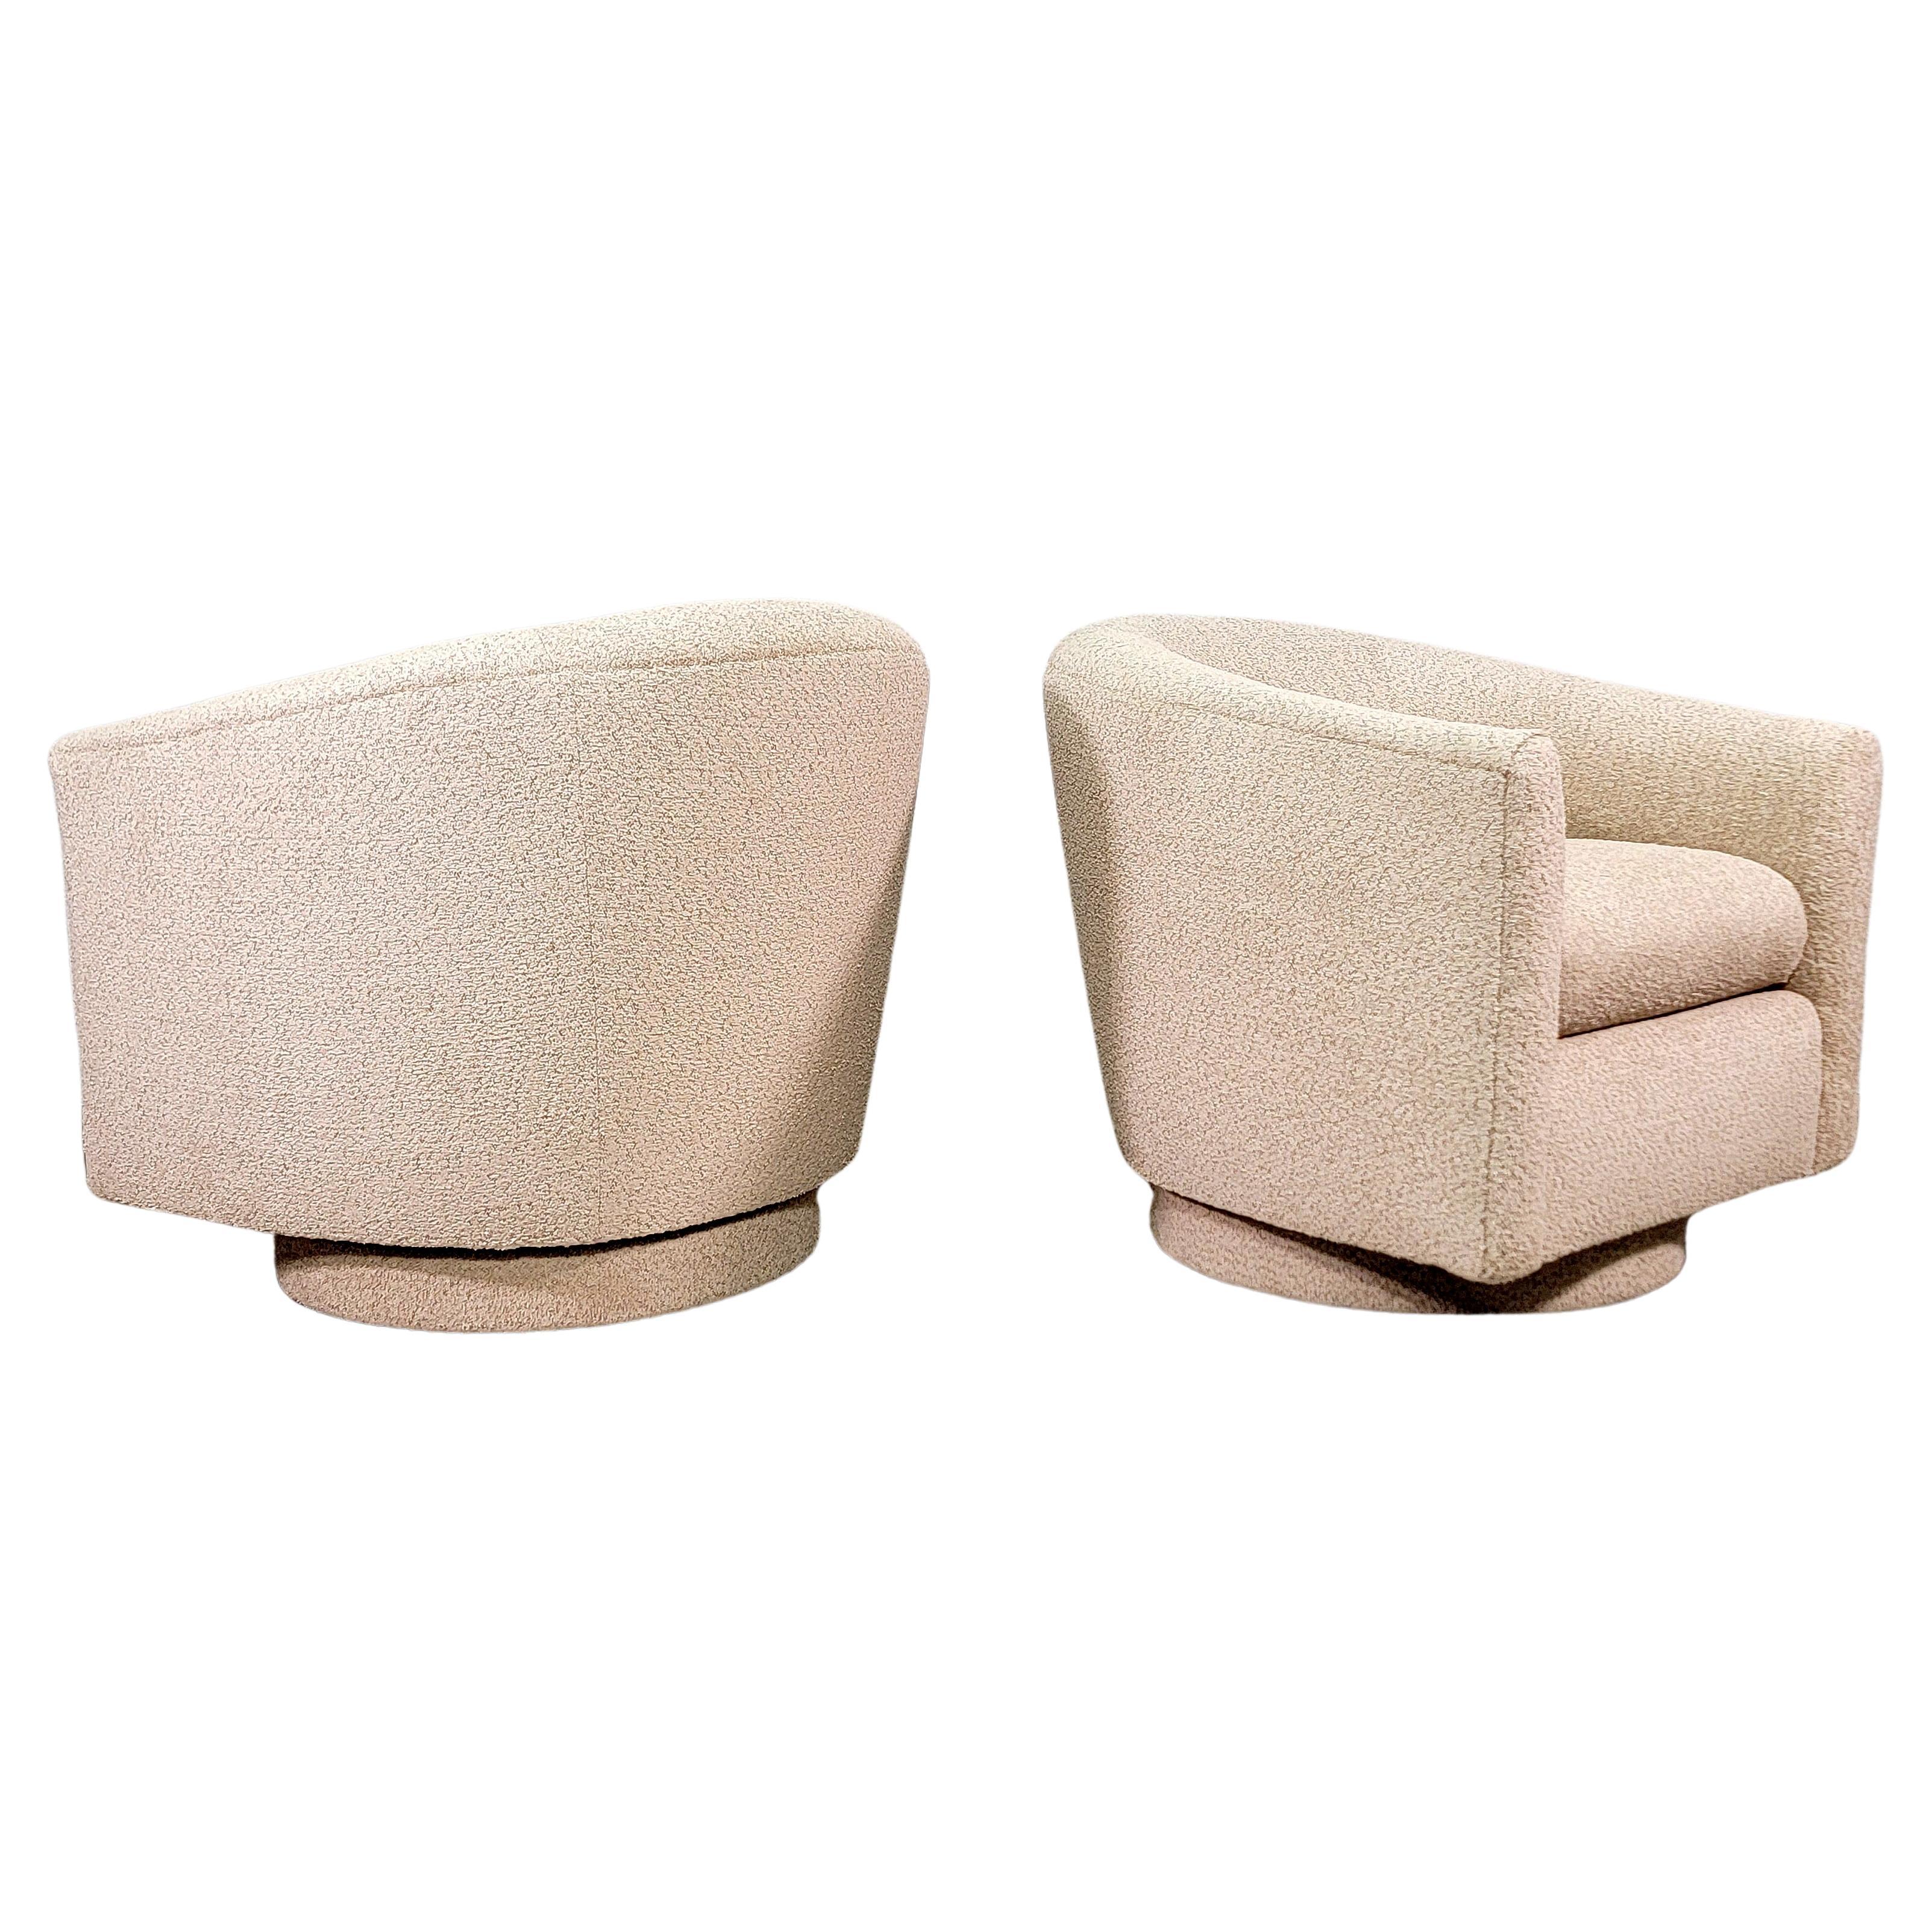 American Swivel Chairs in Bouclé in the Style of Milo Baughman, 1970s For Sale